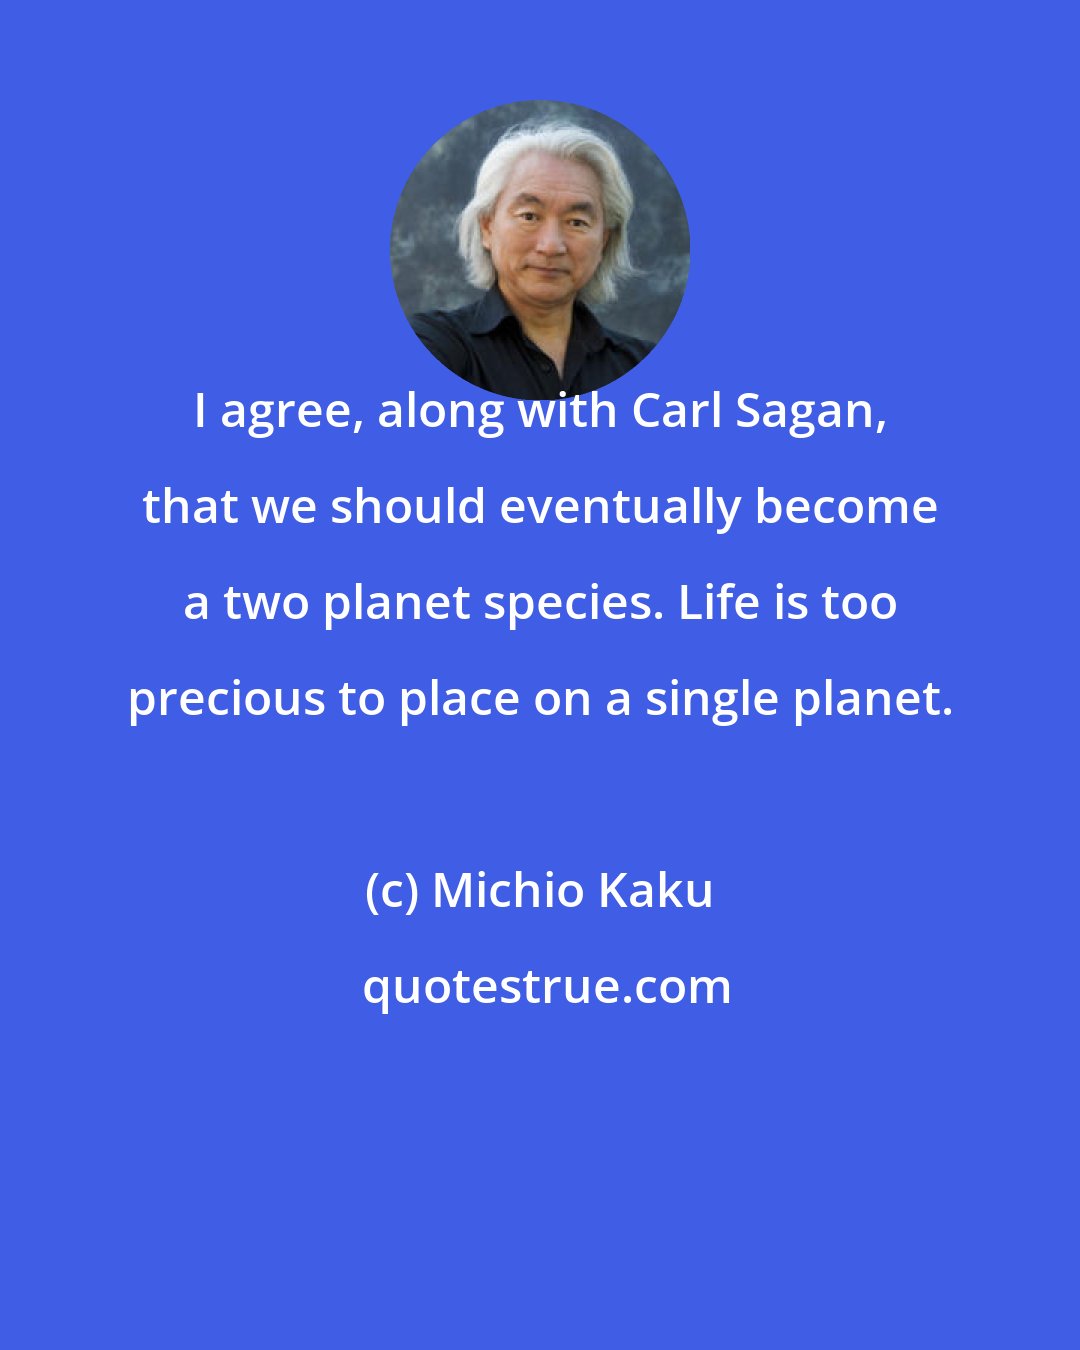 Michio Kaku: I agree, along with Carl Sagan, that we should eventually become a two planet species. Life is too precious to place on a single planet.